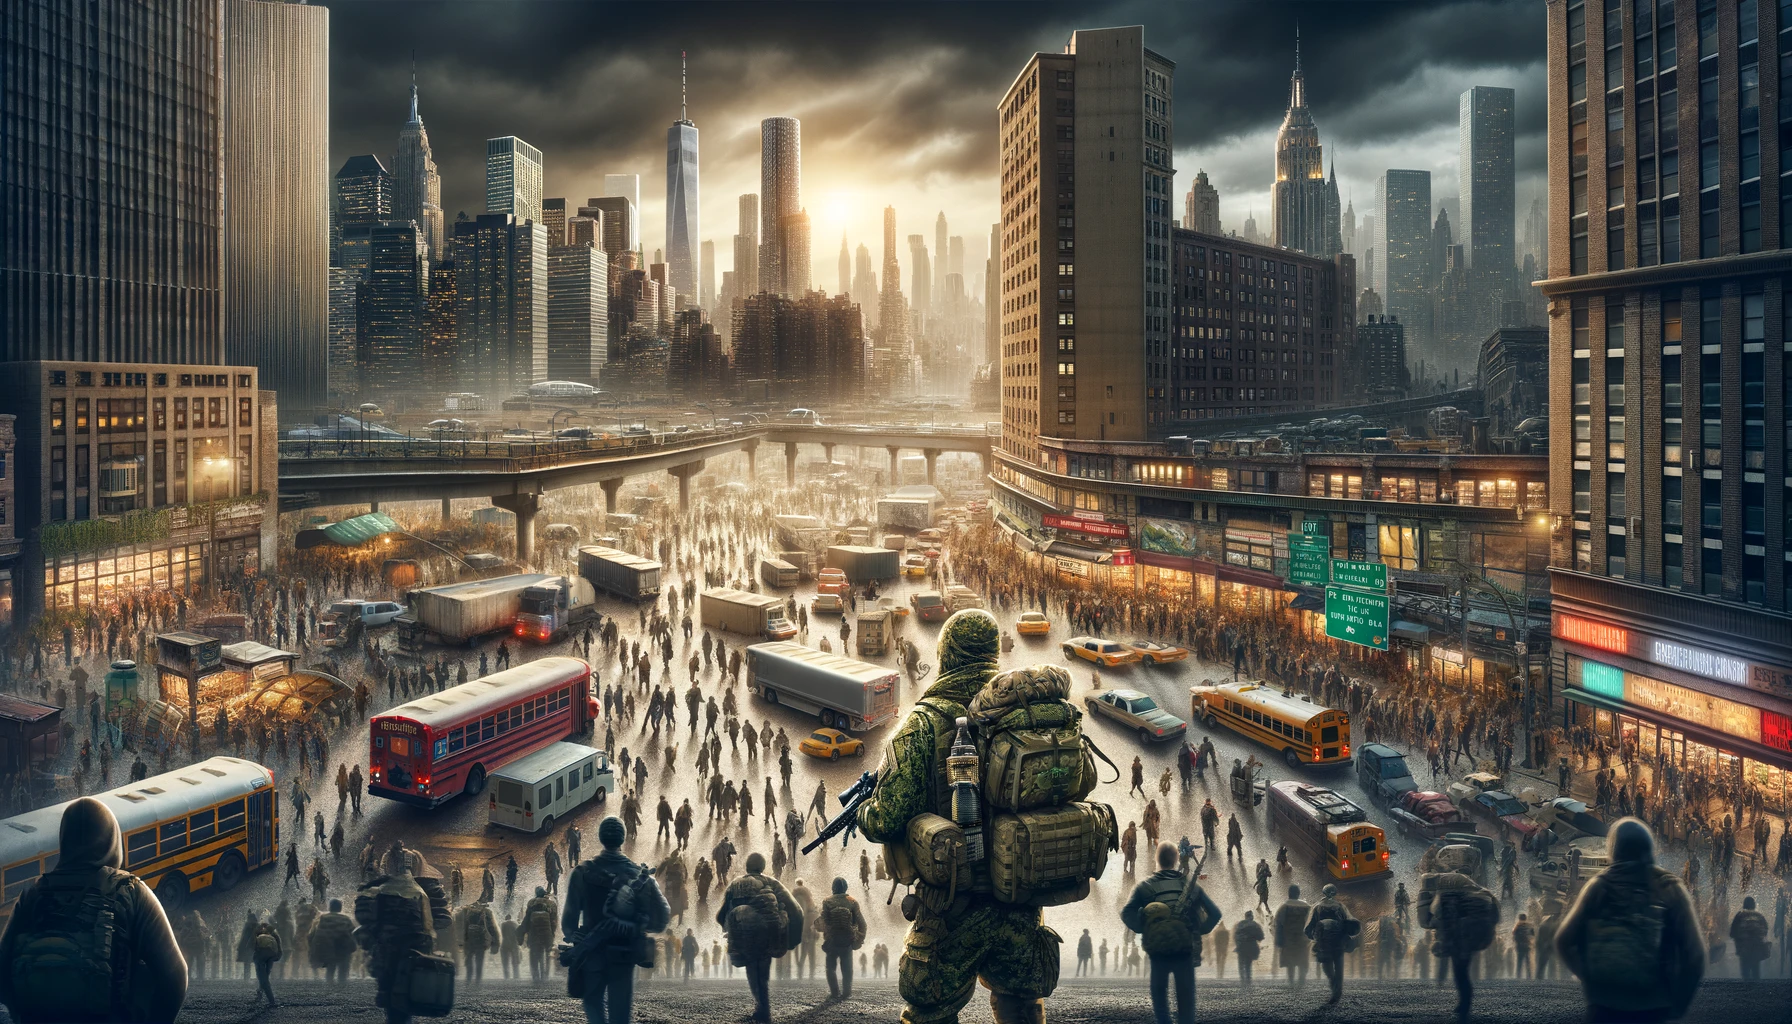 Prepper navigating the complexities of urban environments, from crowded spaces to limited resources, showcasing adaptability and urban survival skills against a dynamic city backdrop